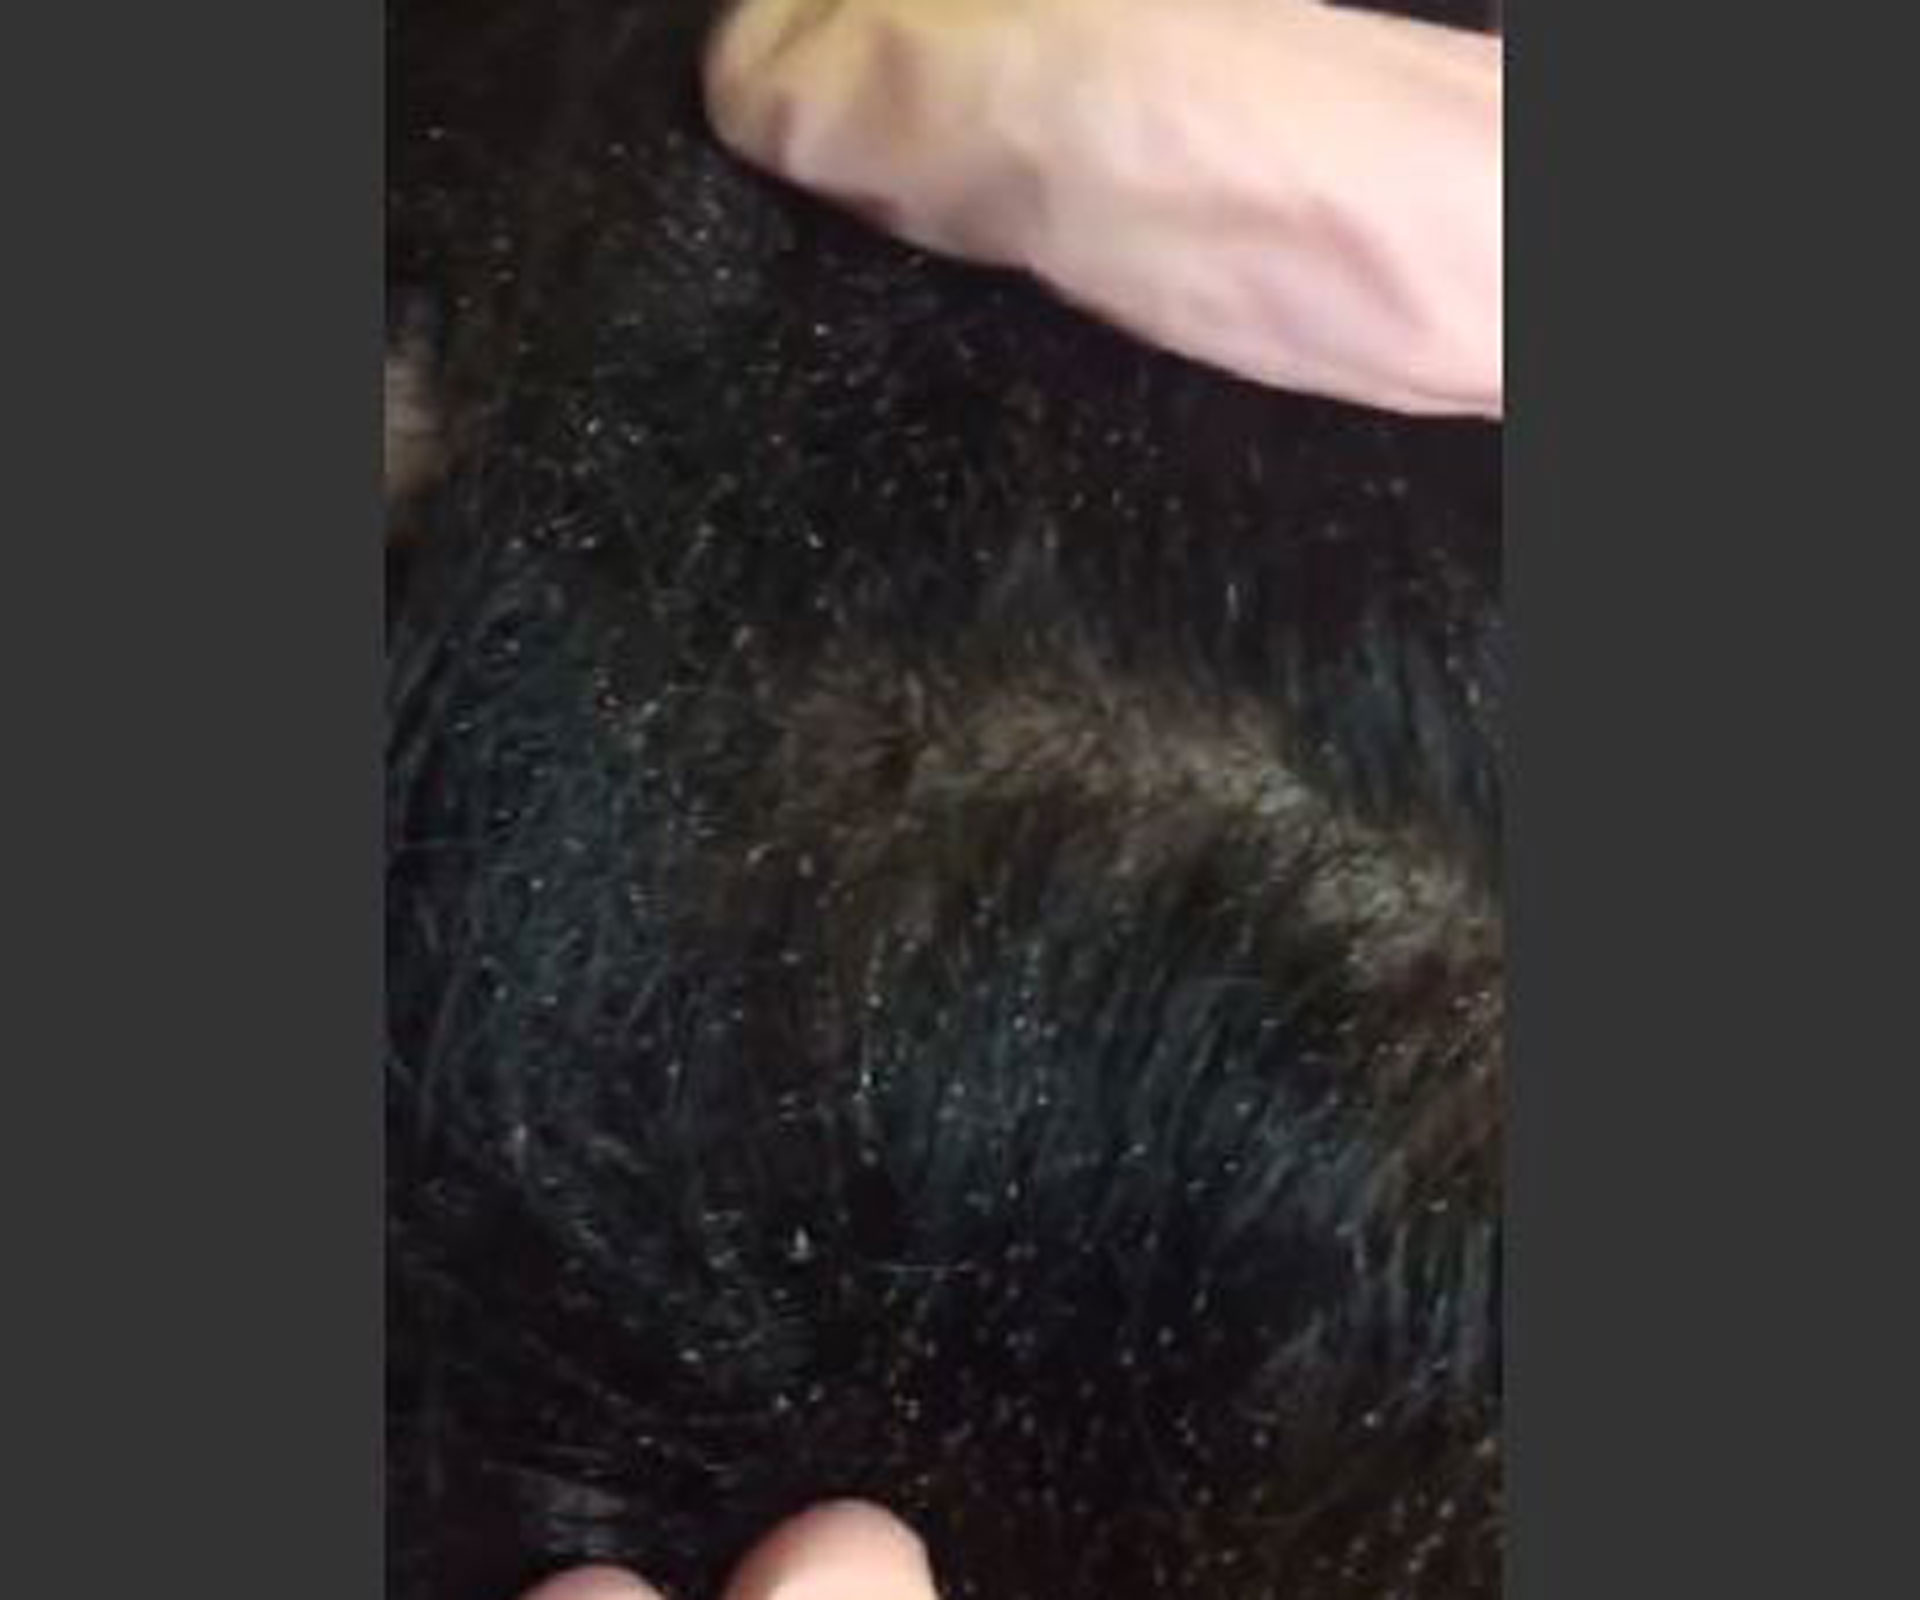 WATCH: Is this the worst case of head lice you’ve ever seen?